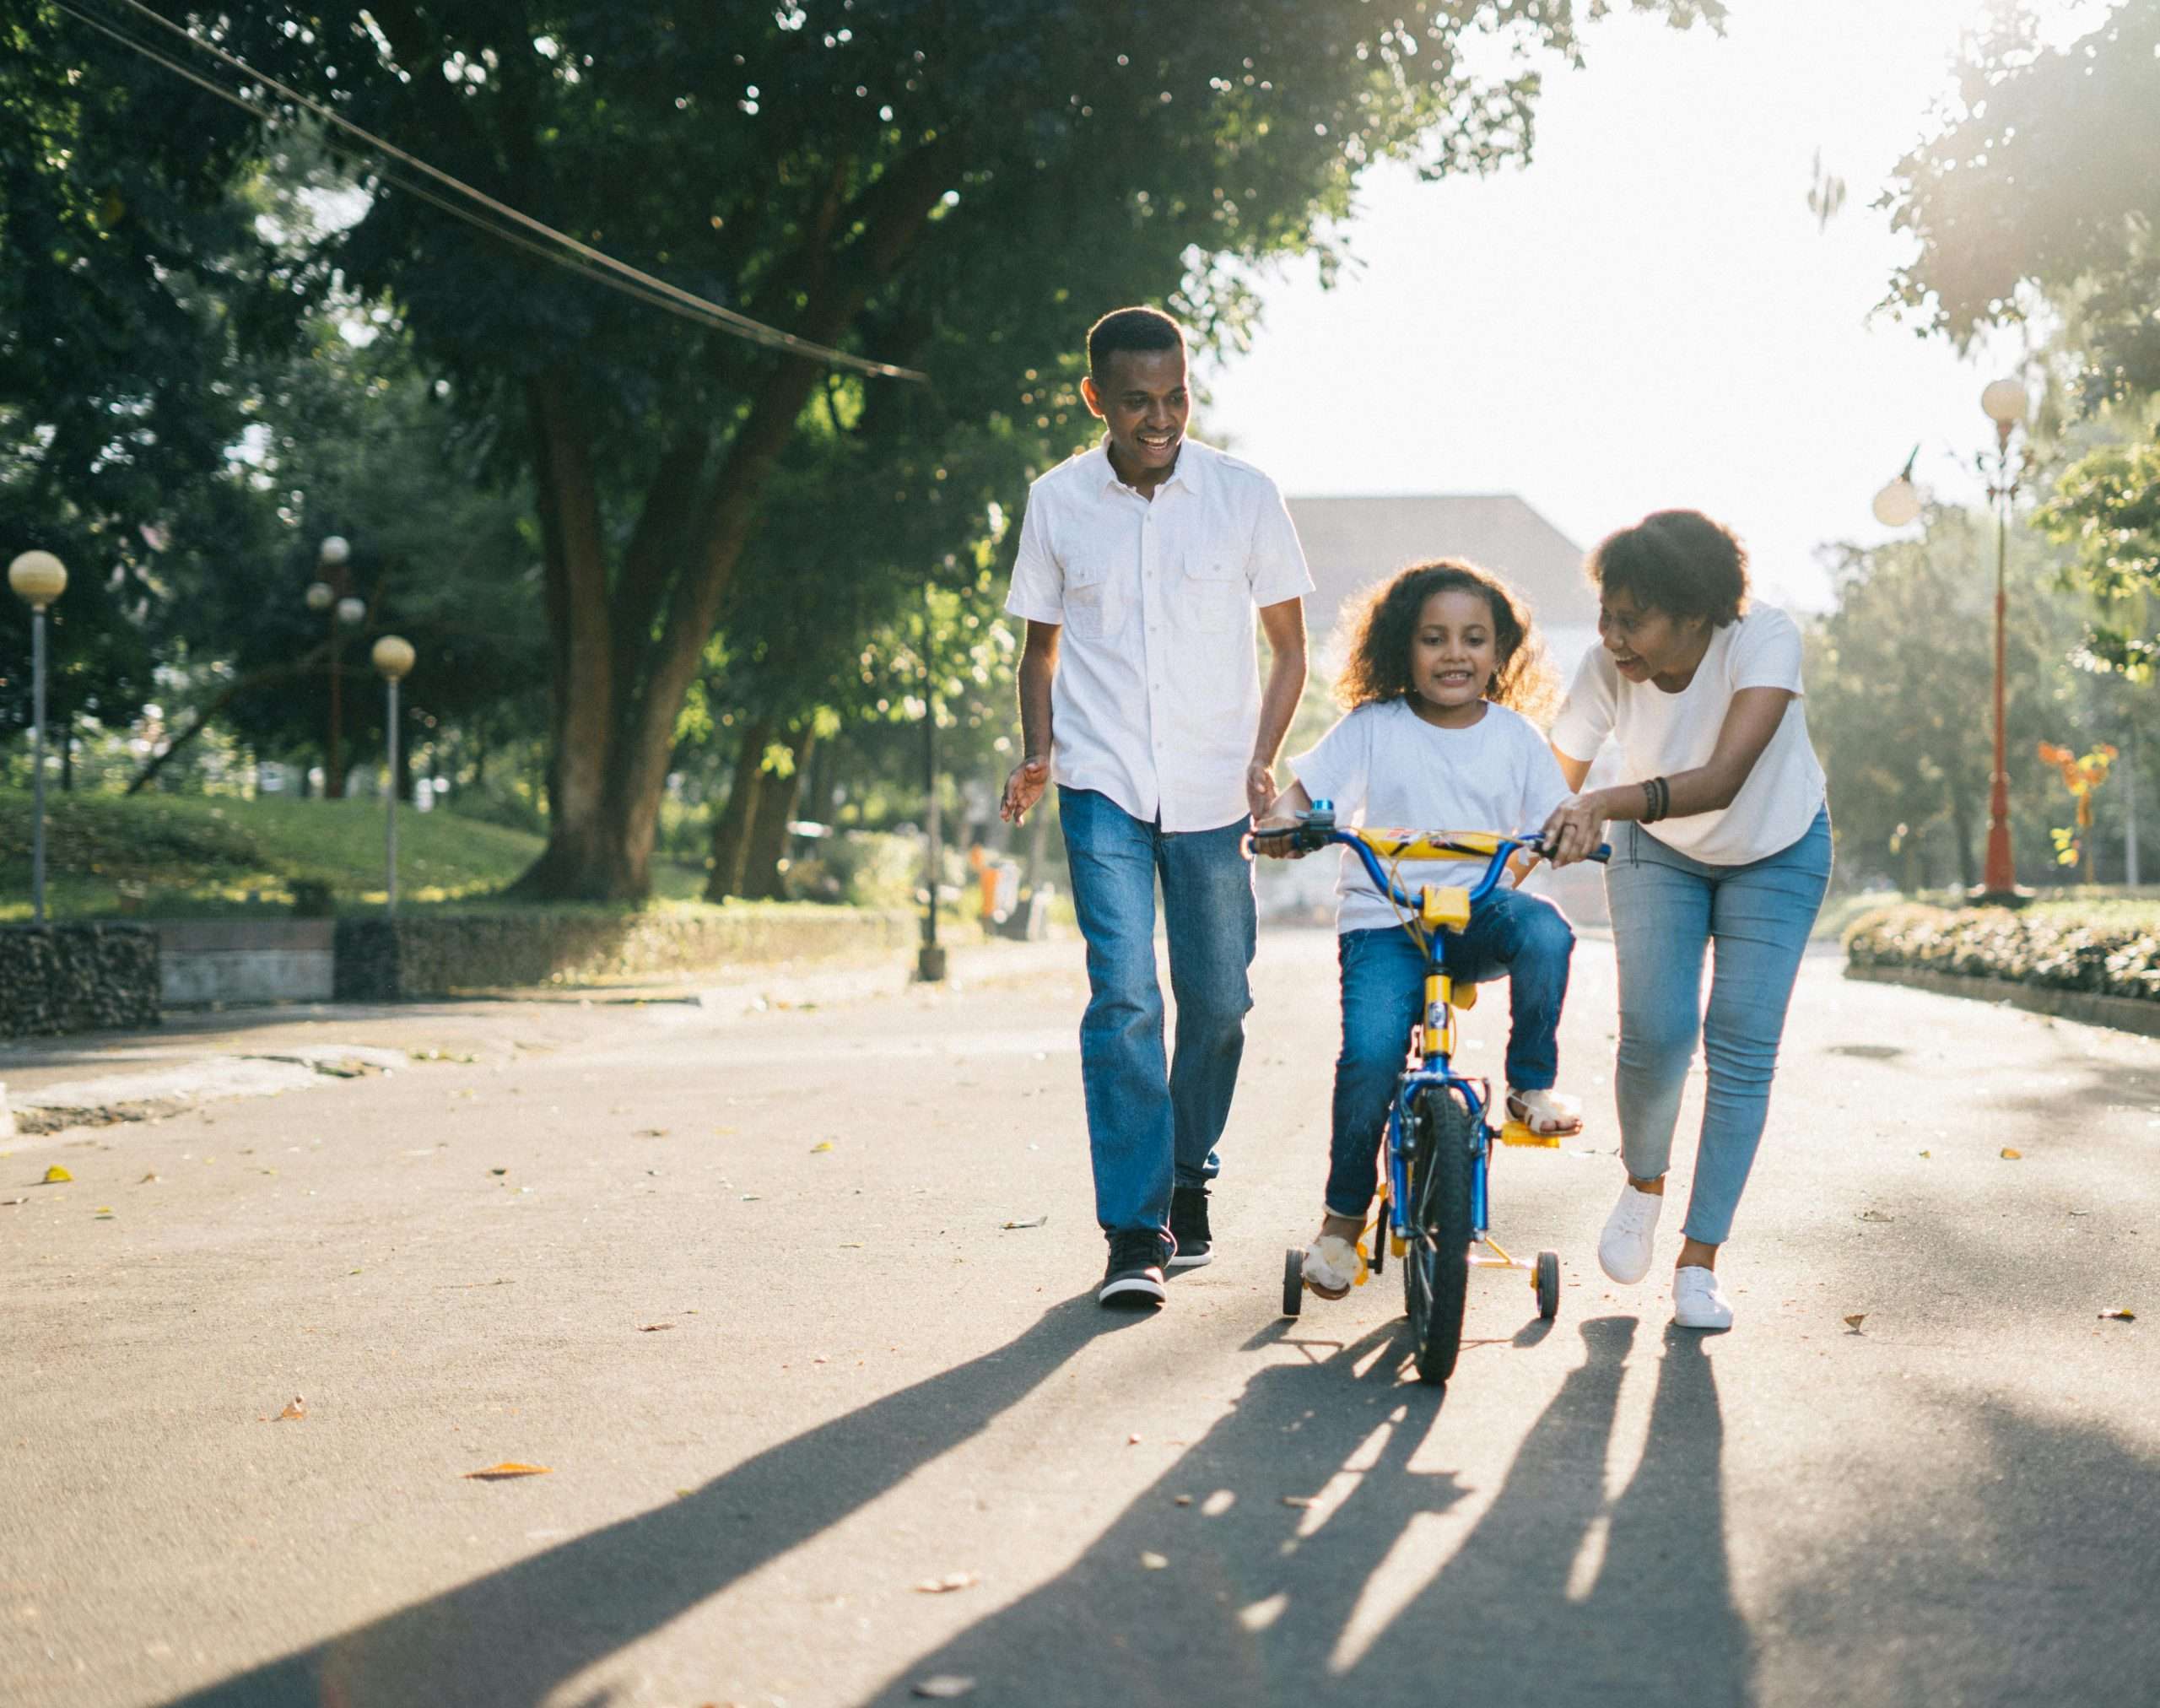 health and wellbeing: parents teaching their child to ride a bike